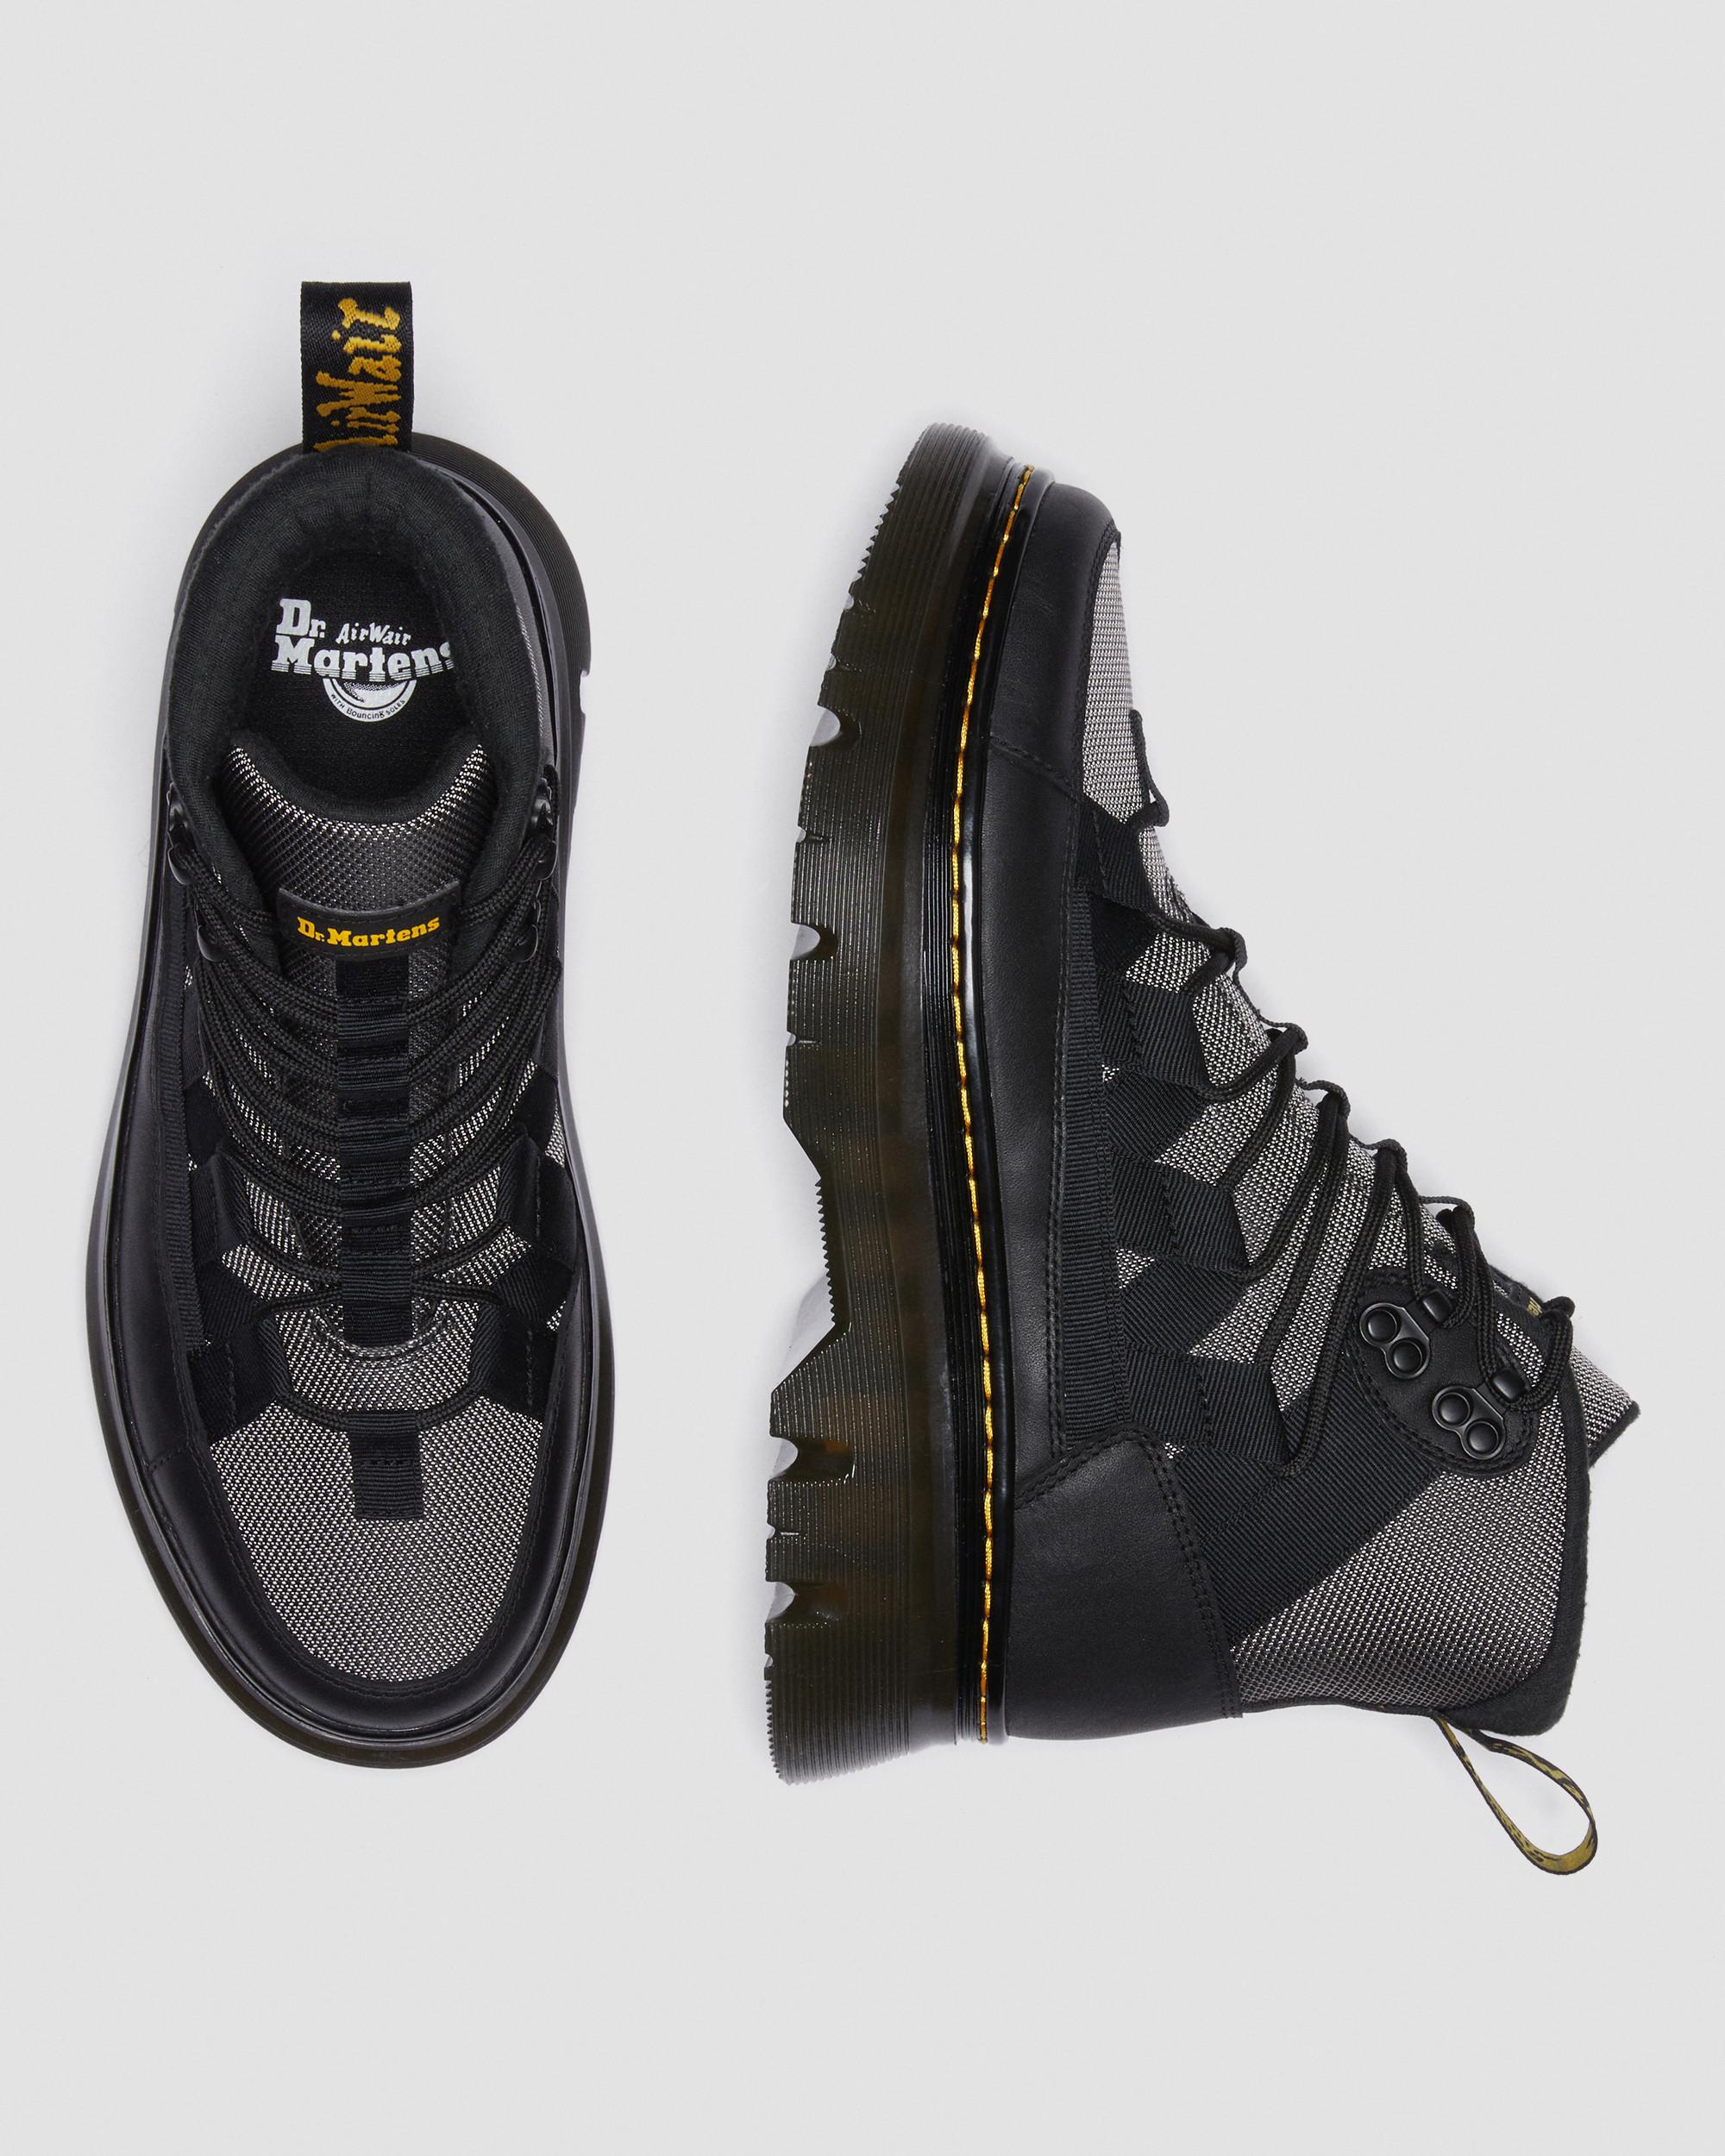 Boury Contrast Utility Boots | Dr. Martens